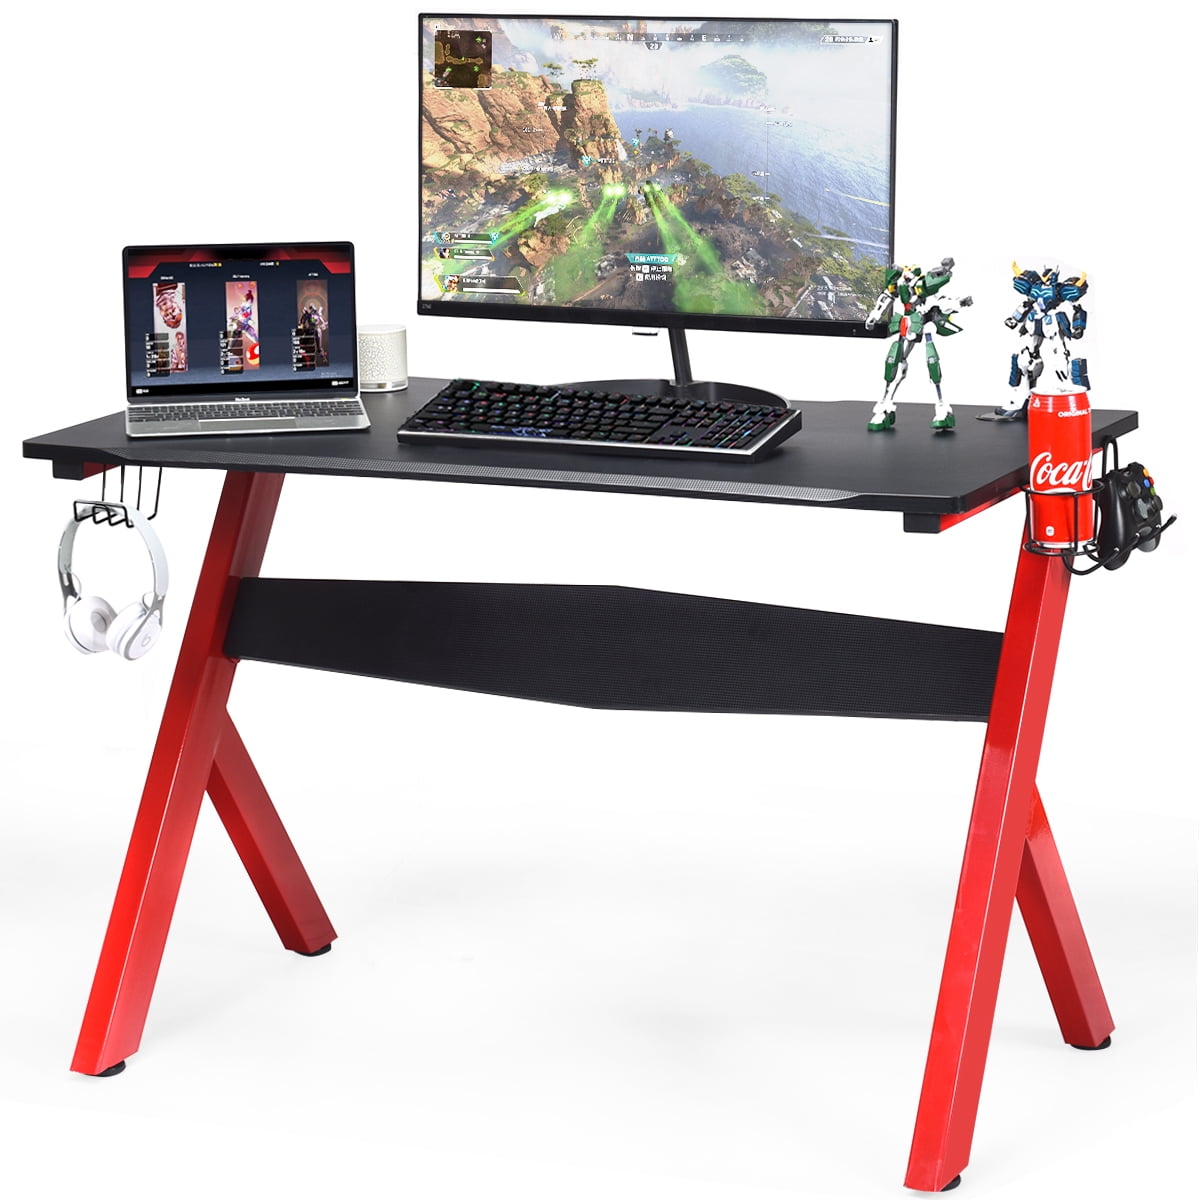 Details about   63"Large Gaming Desk Home Office Computer Table w/Cup Controller Headset Holder 